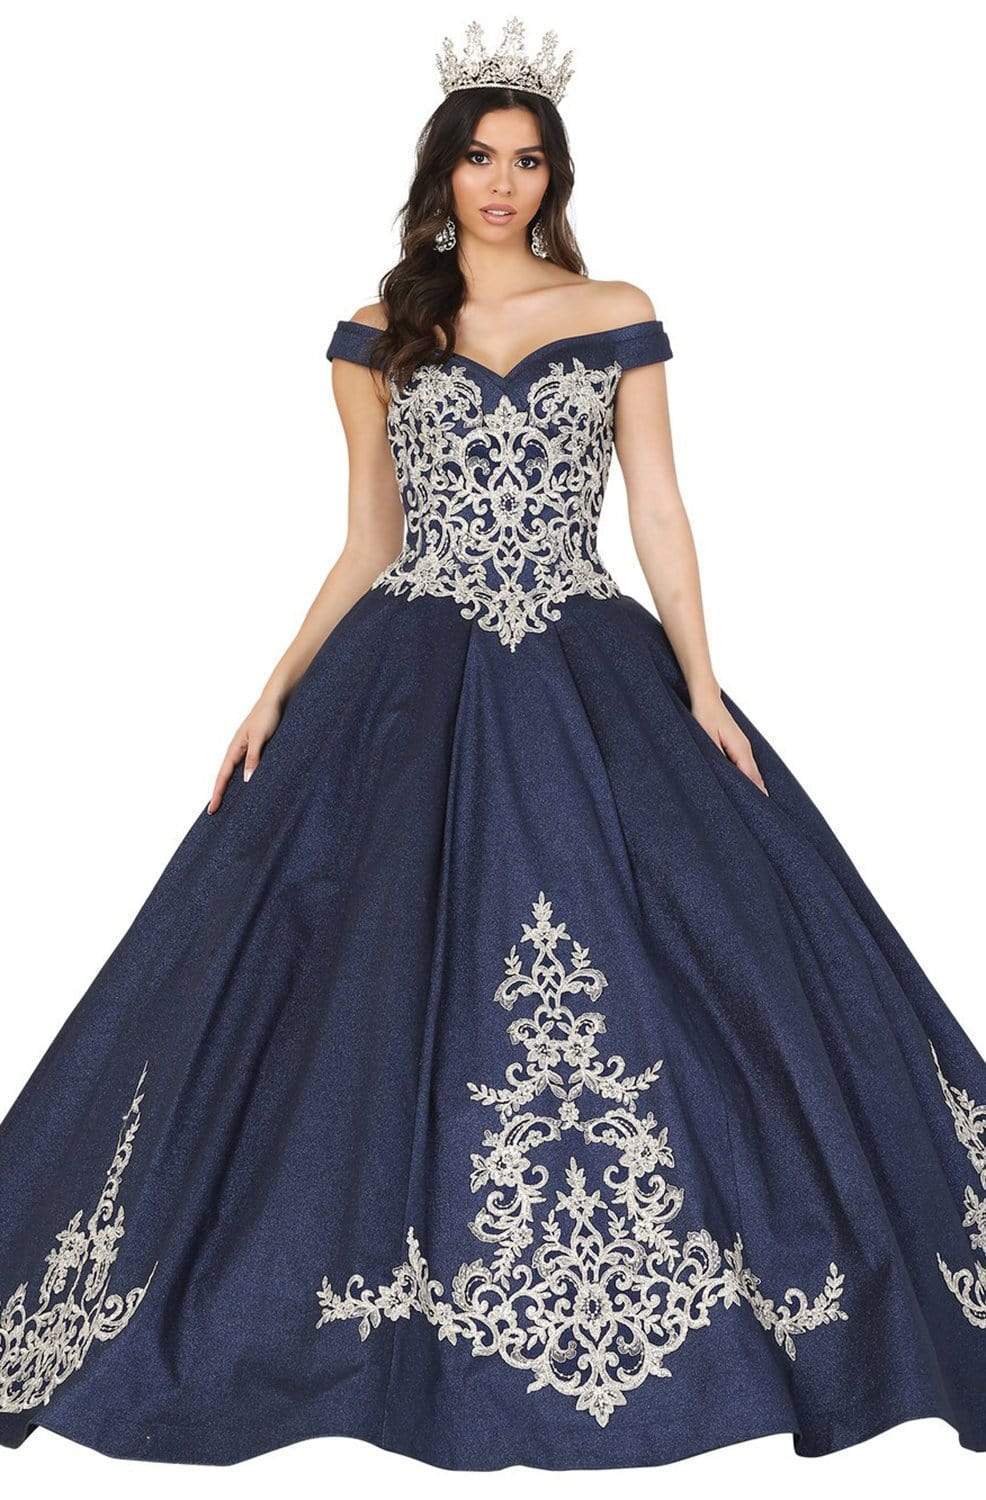 Dancing Queen - 1507 Embroidered Off-Shoulder Ballgown With Train
